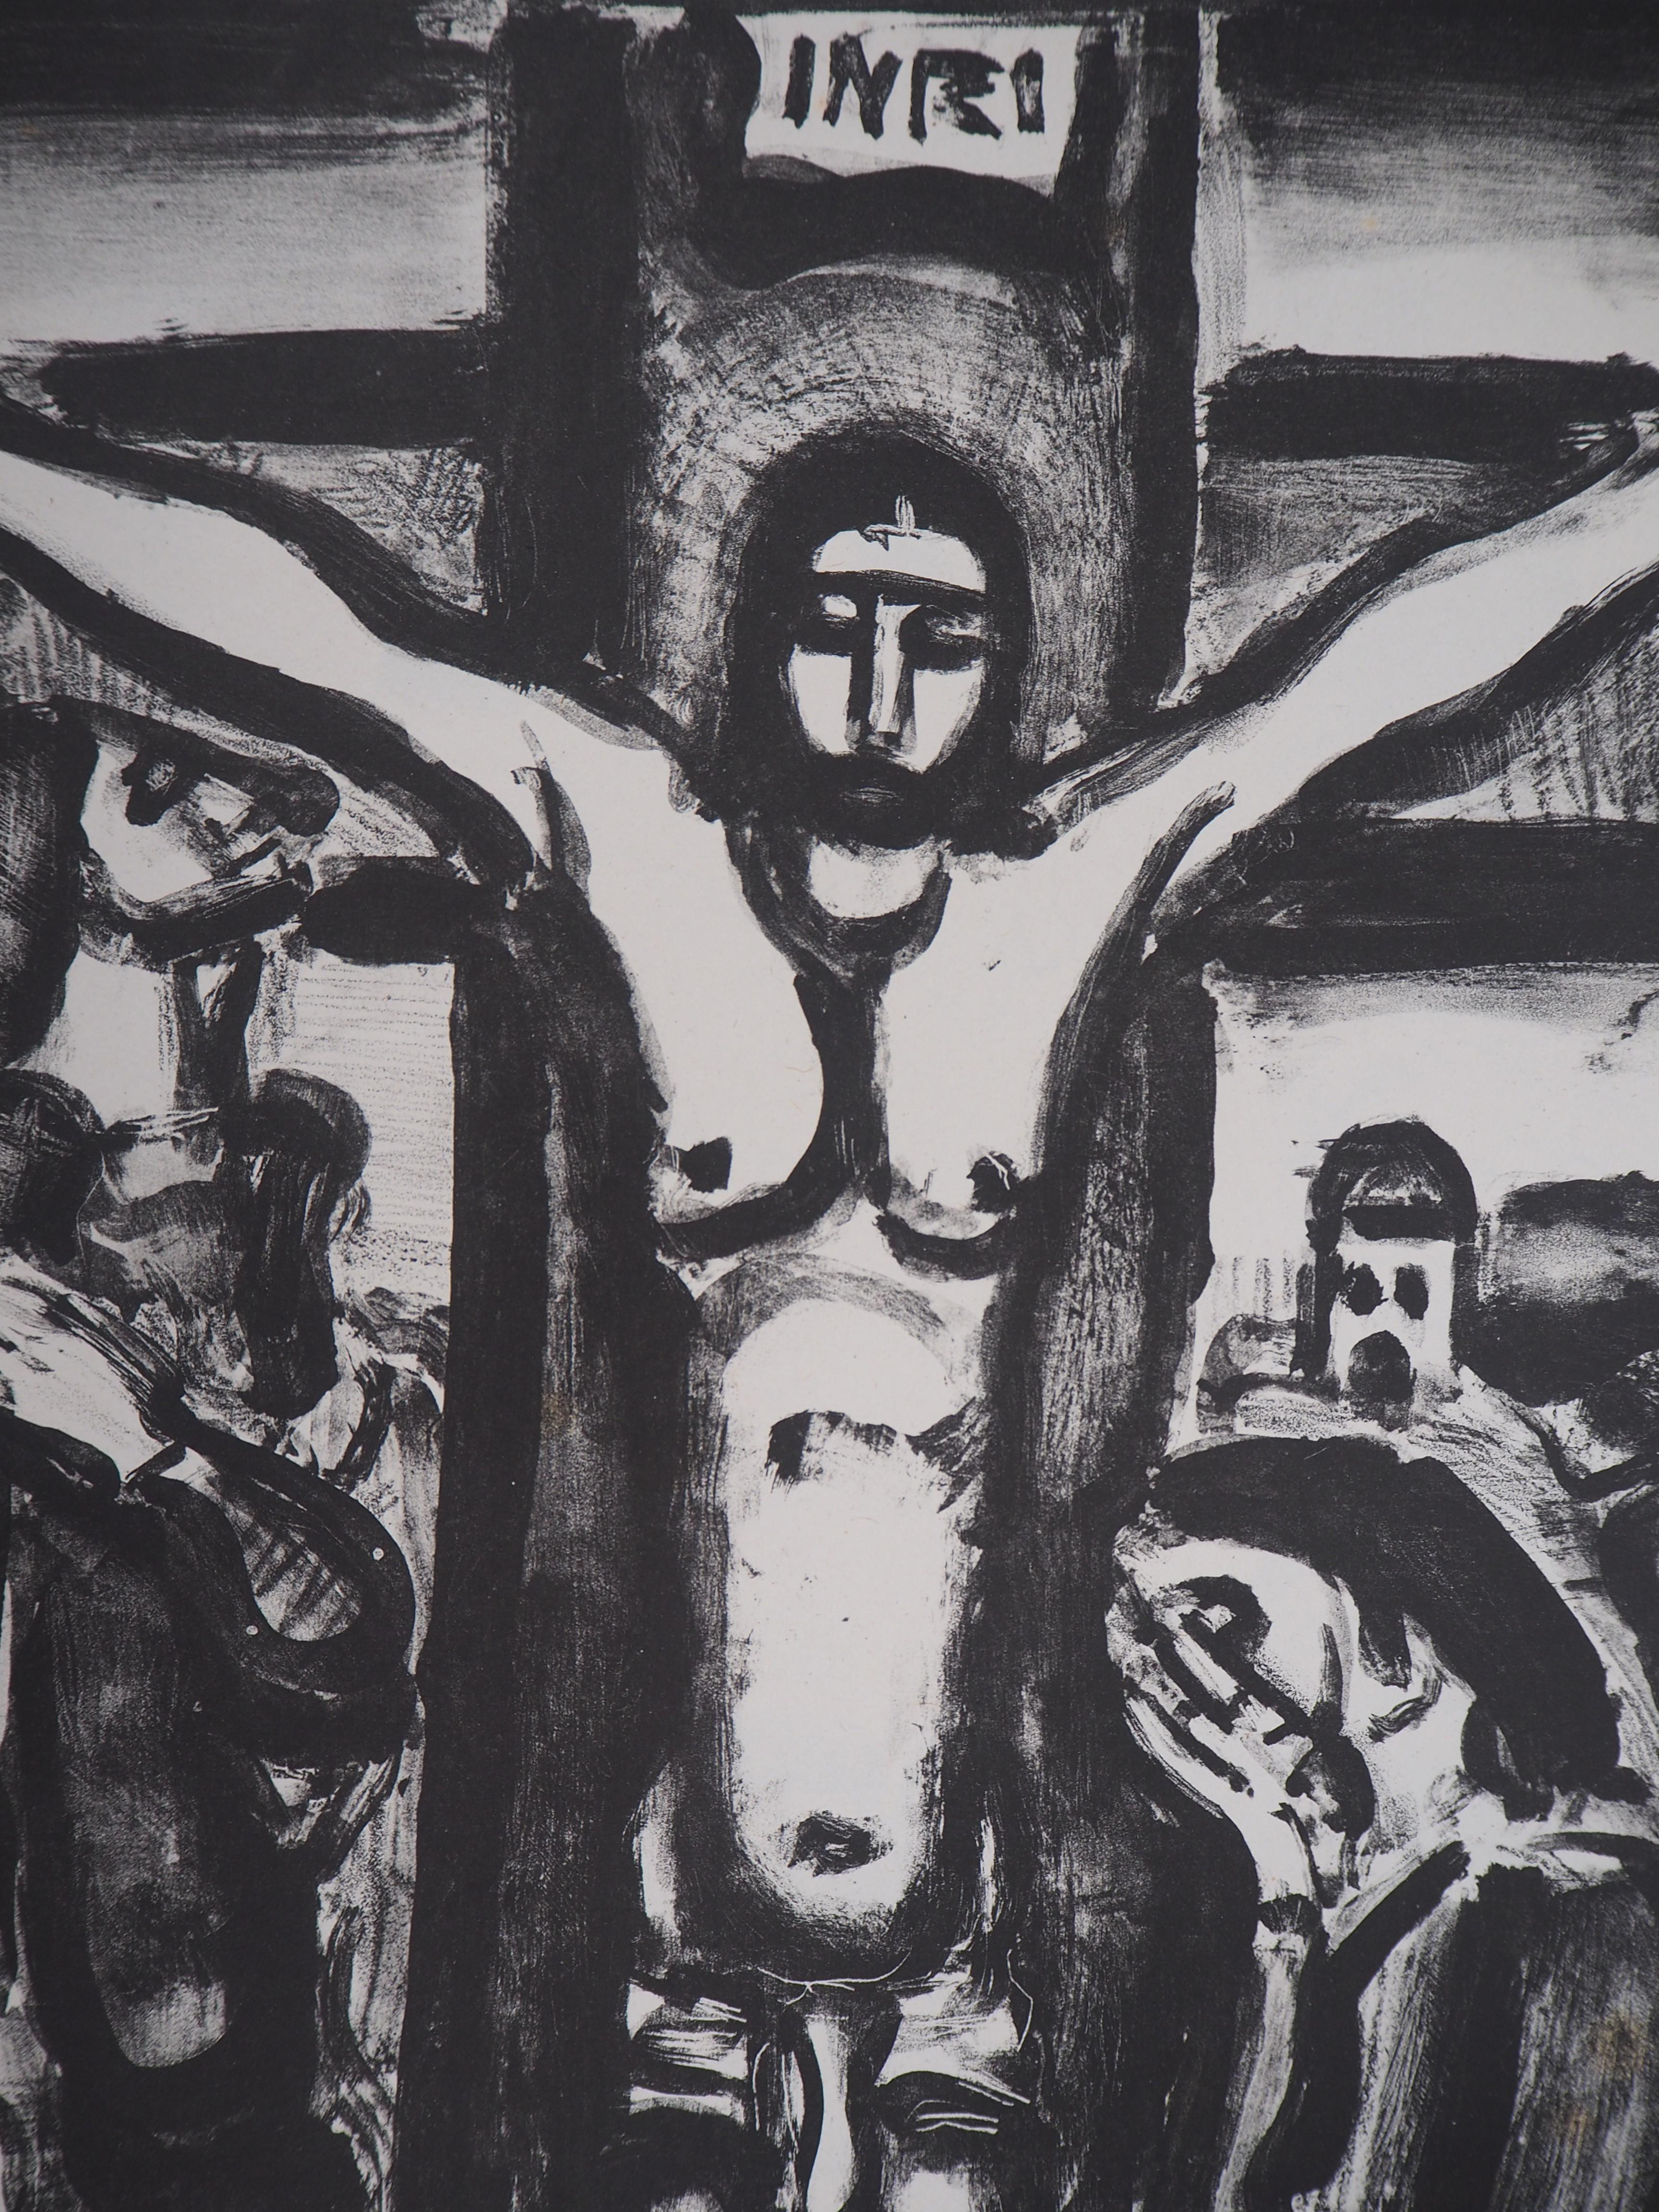 Christ on the Cross - Original lithograph, (I. Rouault #306) - Modern Print by Georges Rouault